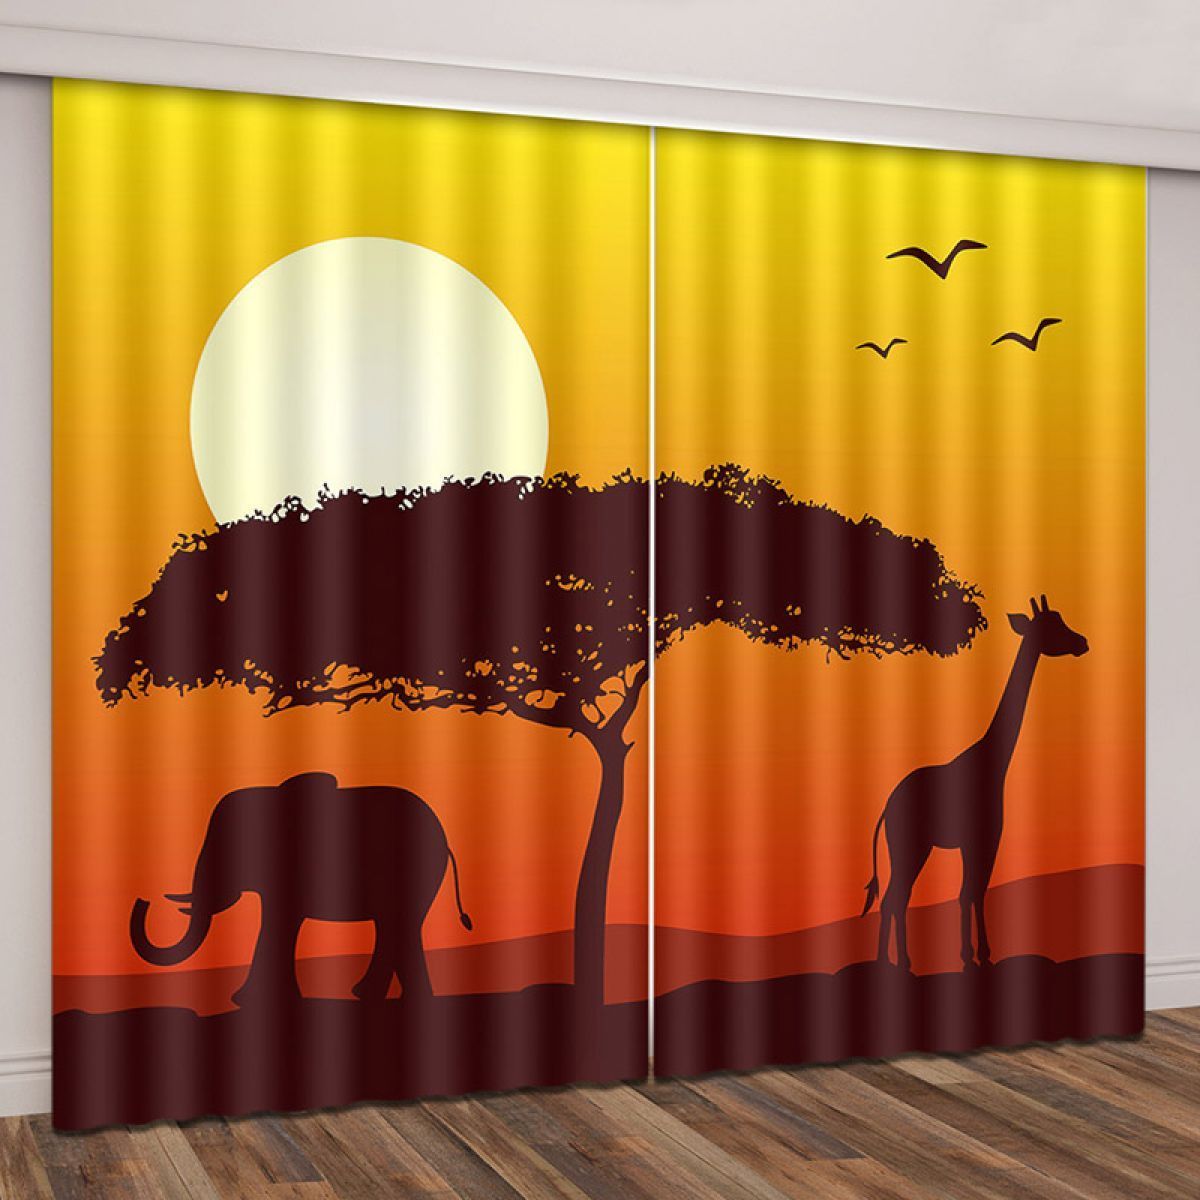 3d Printing Giraffe And Elephant At Sunset Printed Window Curtain Home Decor